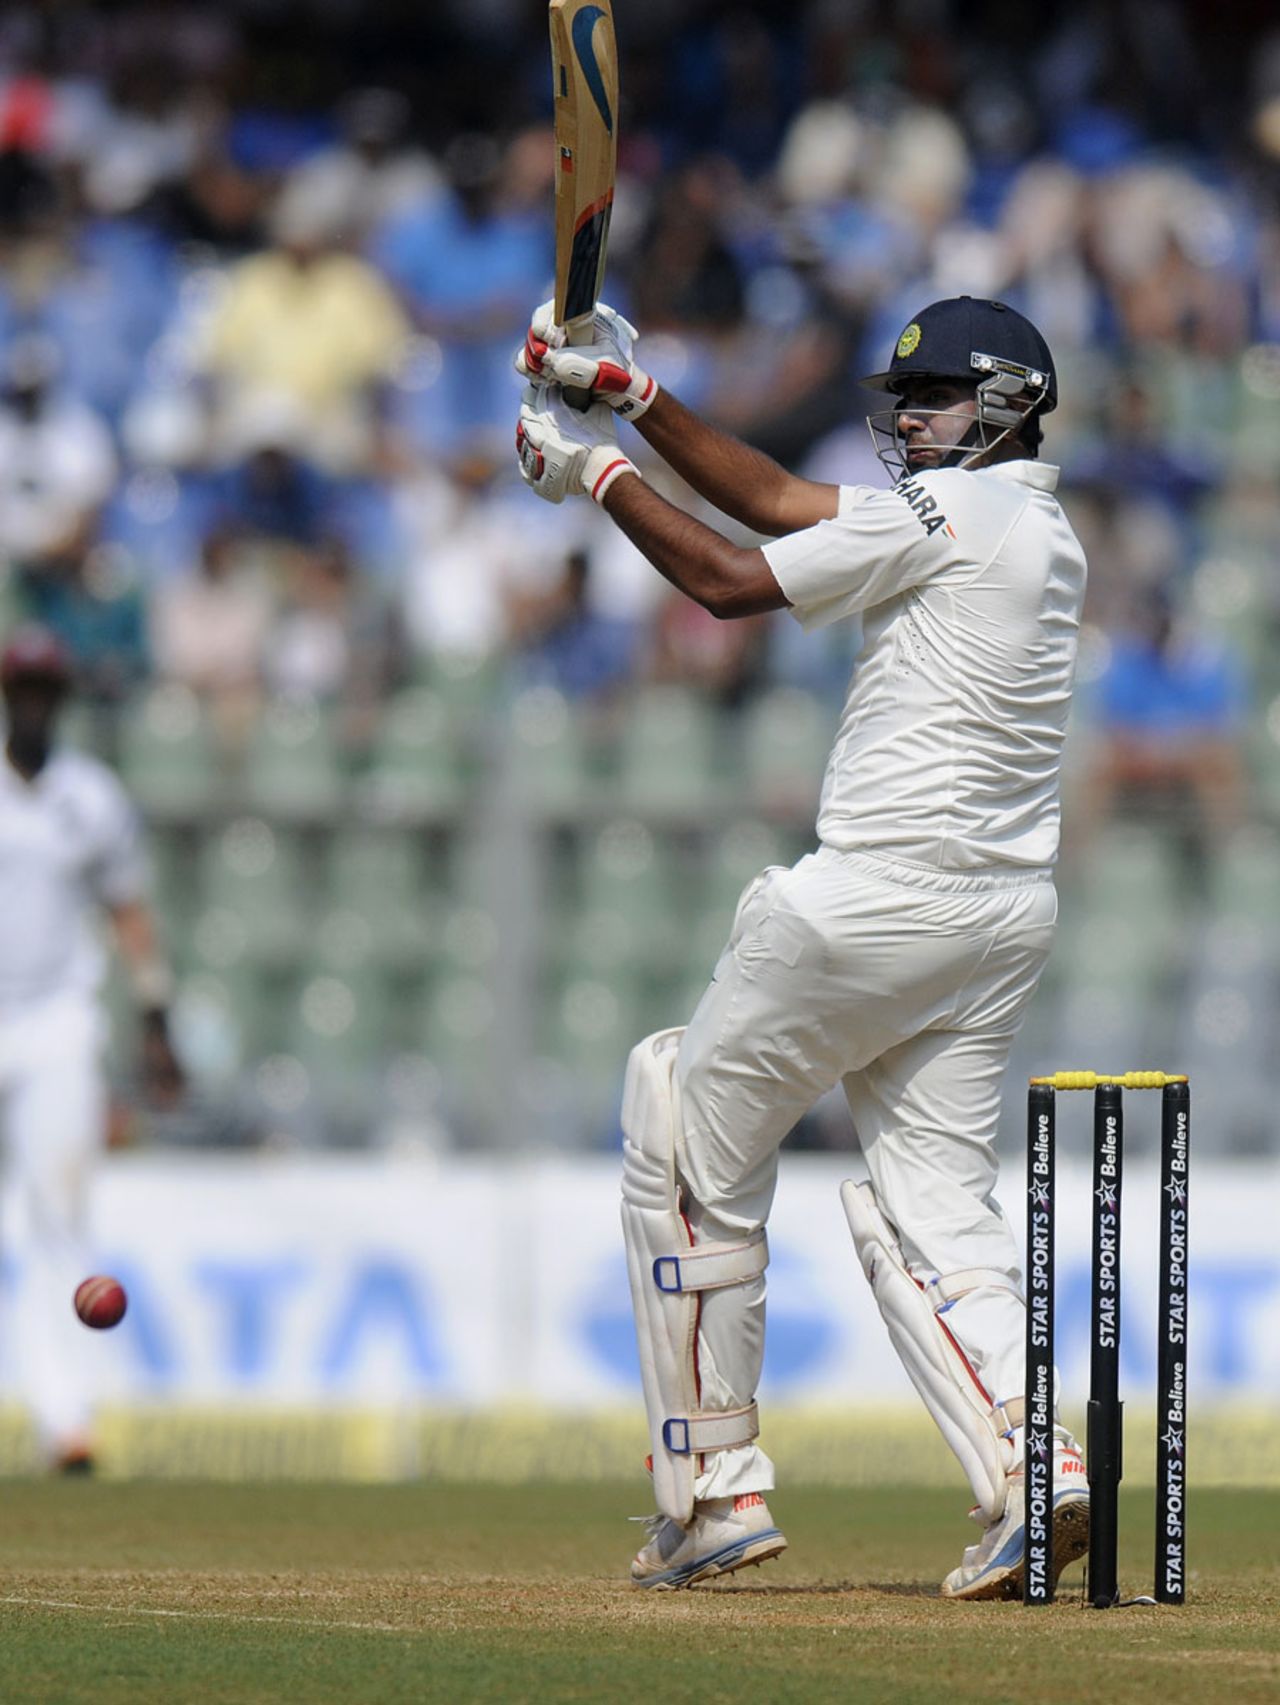 R Ashwin chipped in with a 32-ball 30, India v West Indies, 2nd Test, Mumbai, 2nd day, November 15, 2013